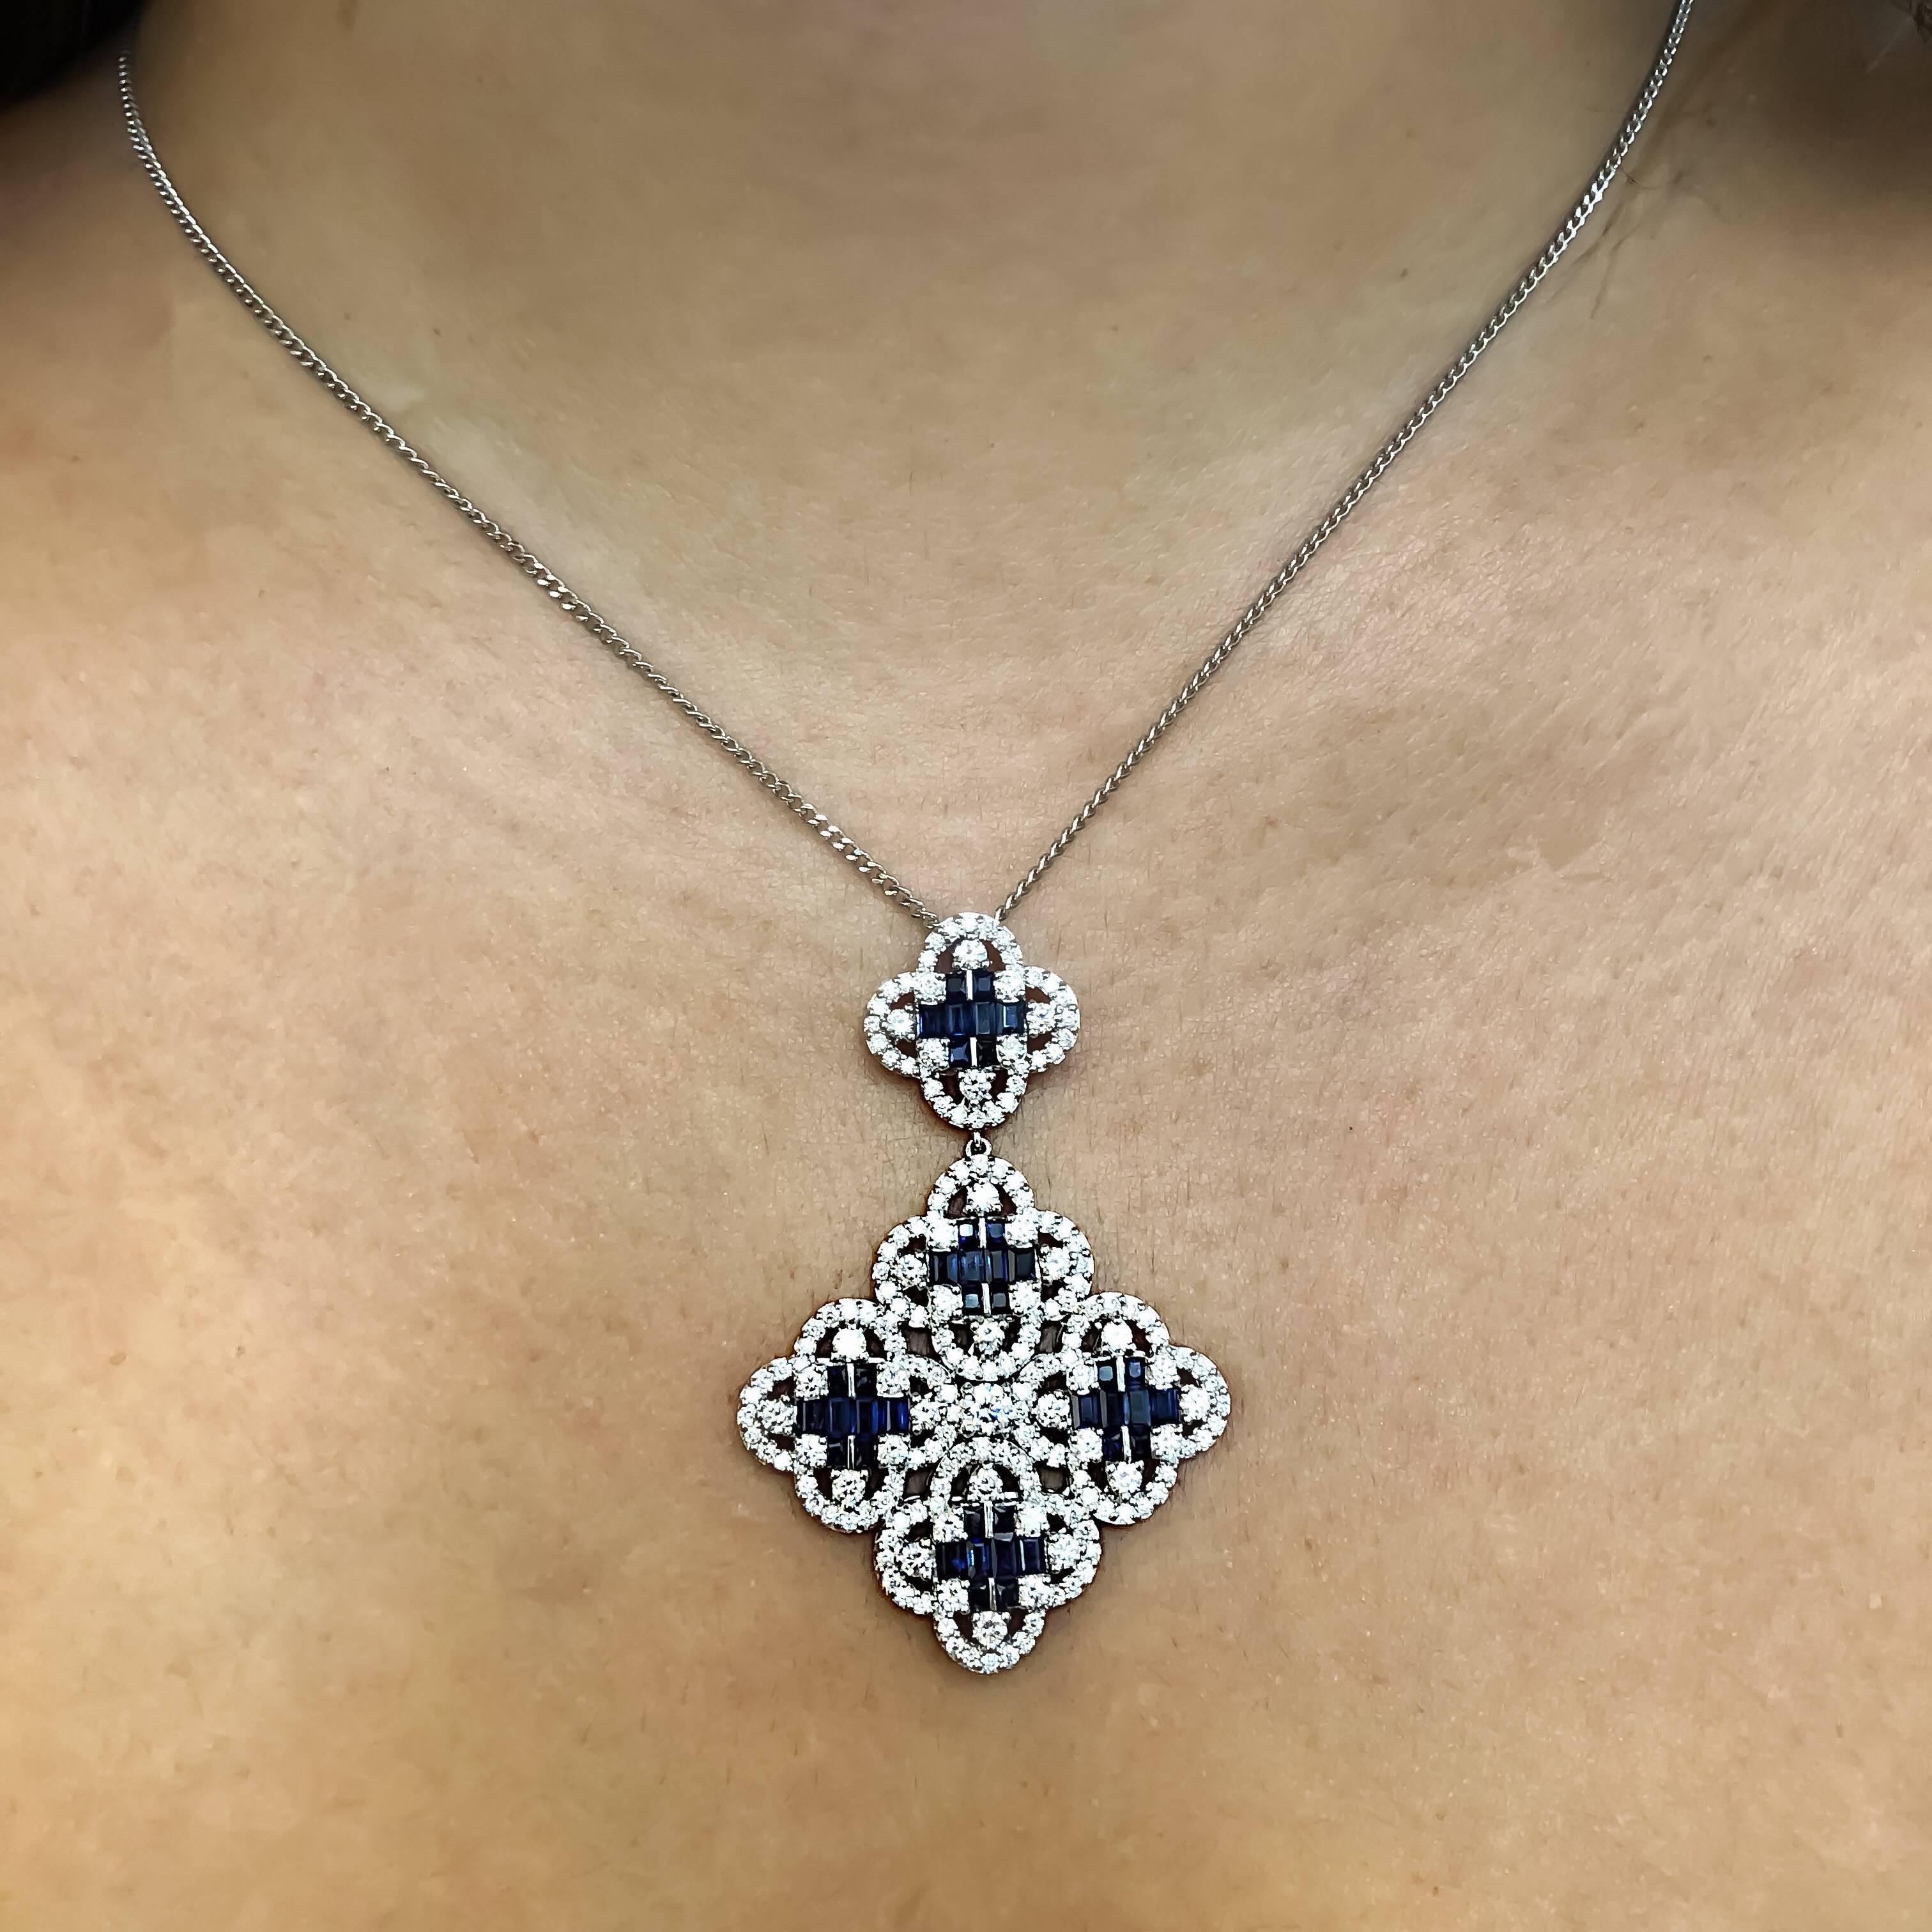 Gorgeous 18kt white gold Clover pendant.
Mounted with 2.68ct of white brilliant cut diamonds and 2.64ct of elongated baguette cut natural blue sapphire gemstones.
Comes with an 18kt white gold chain.

Matching earrings are available.